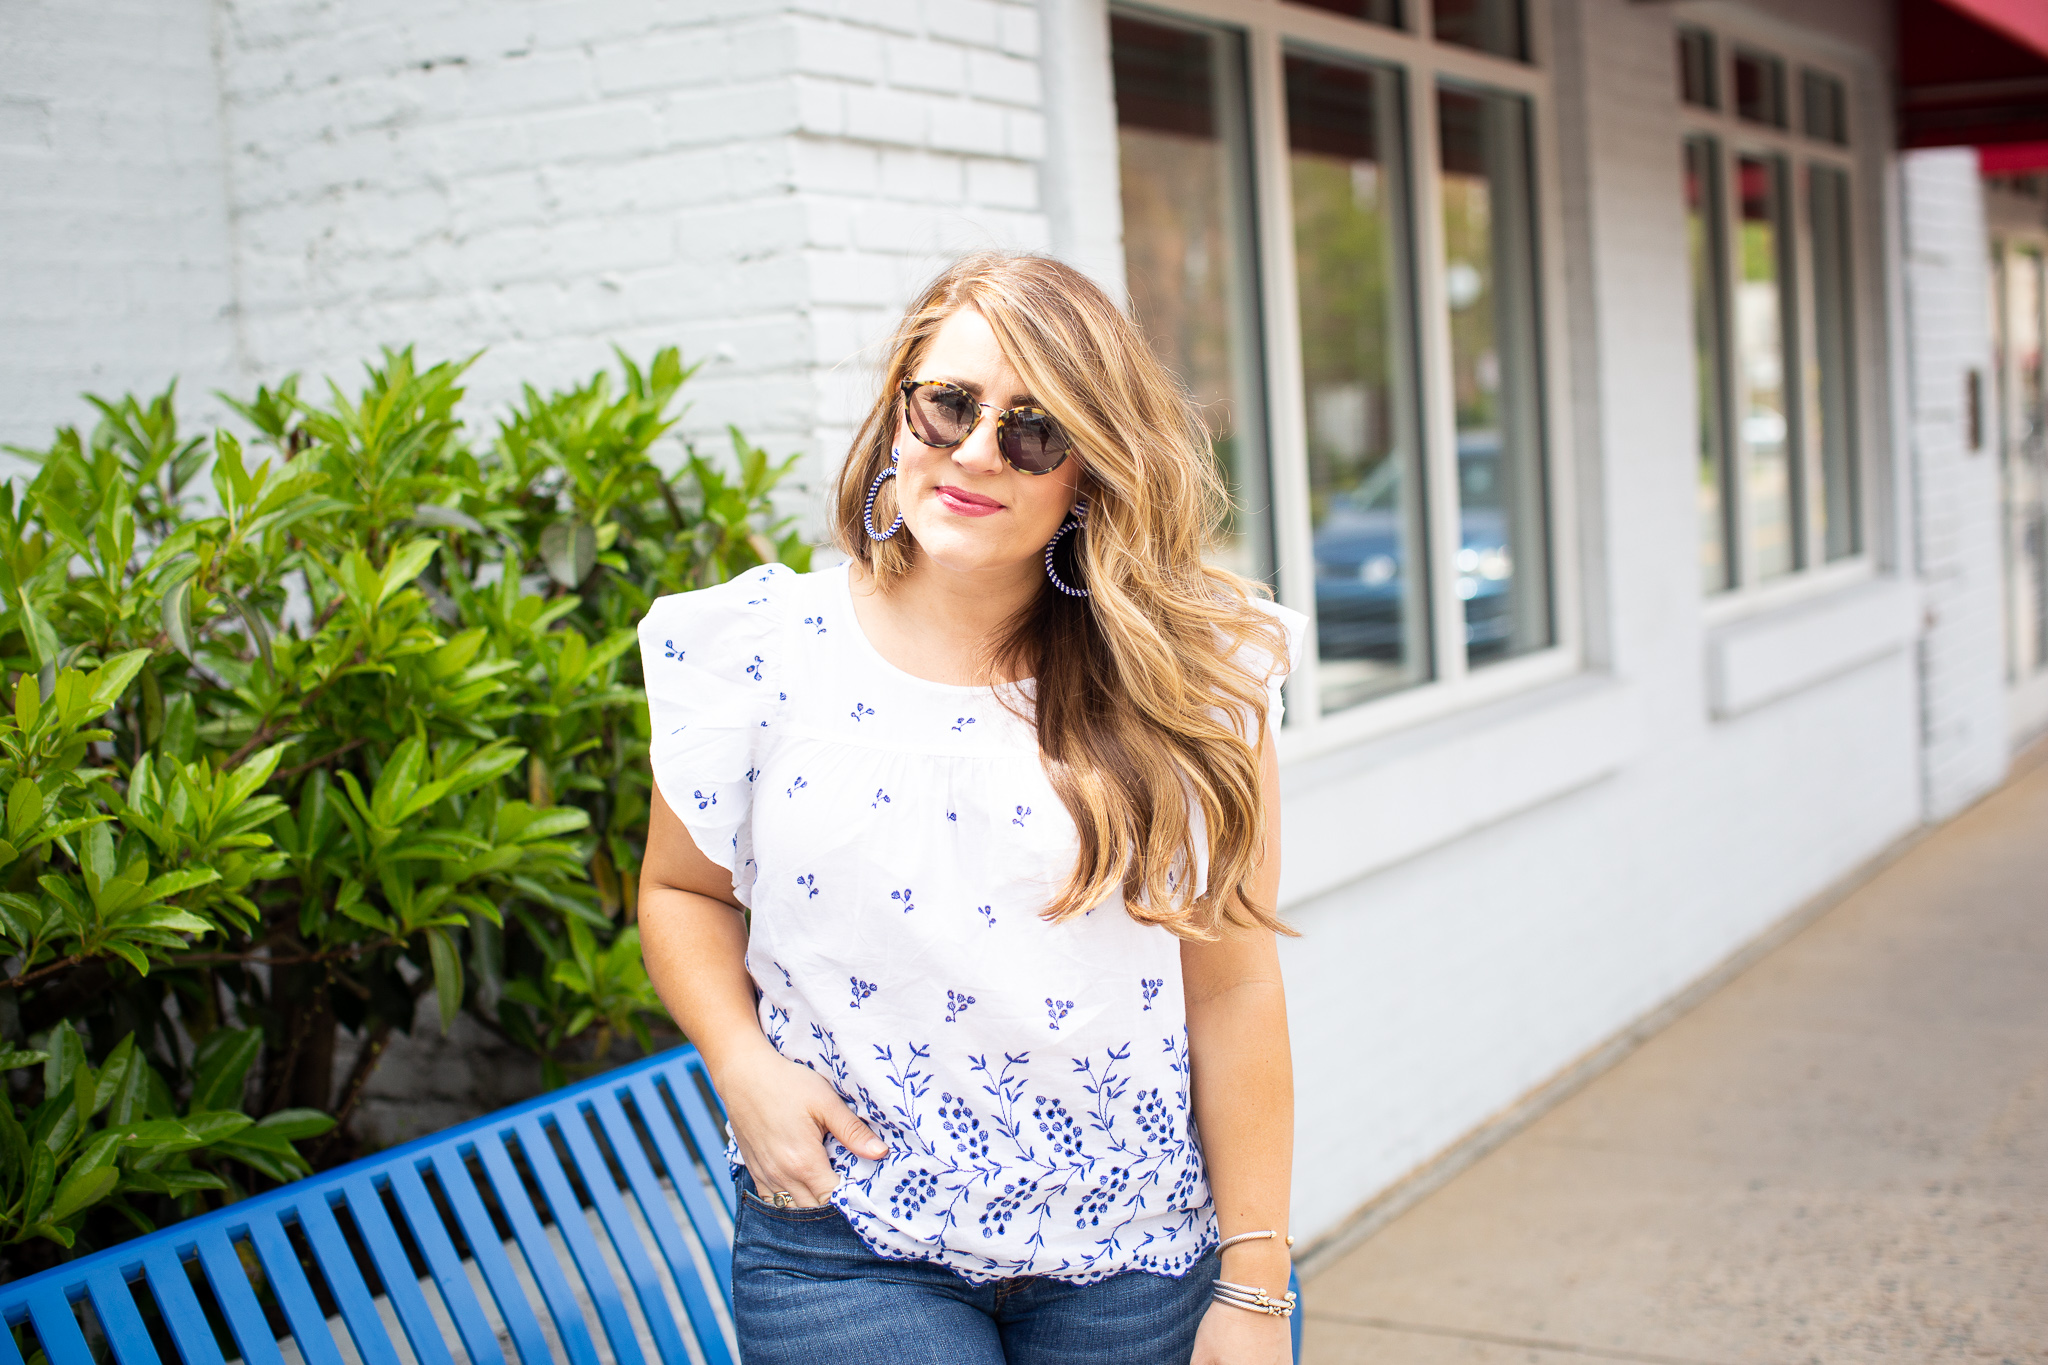 Eyelet Top for Summer, featured by popular North Carolina fashion blogger, Coffee Beans and Bobby Pins